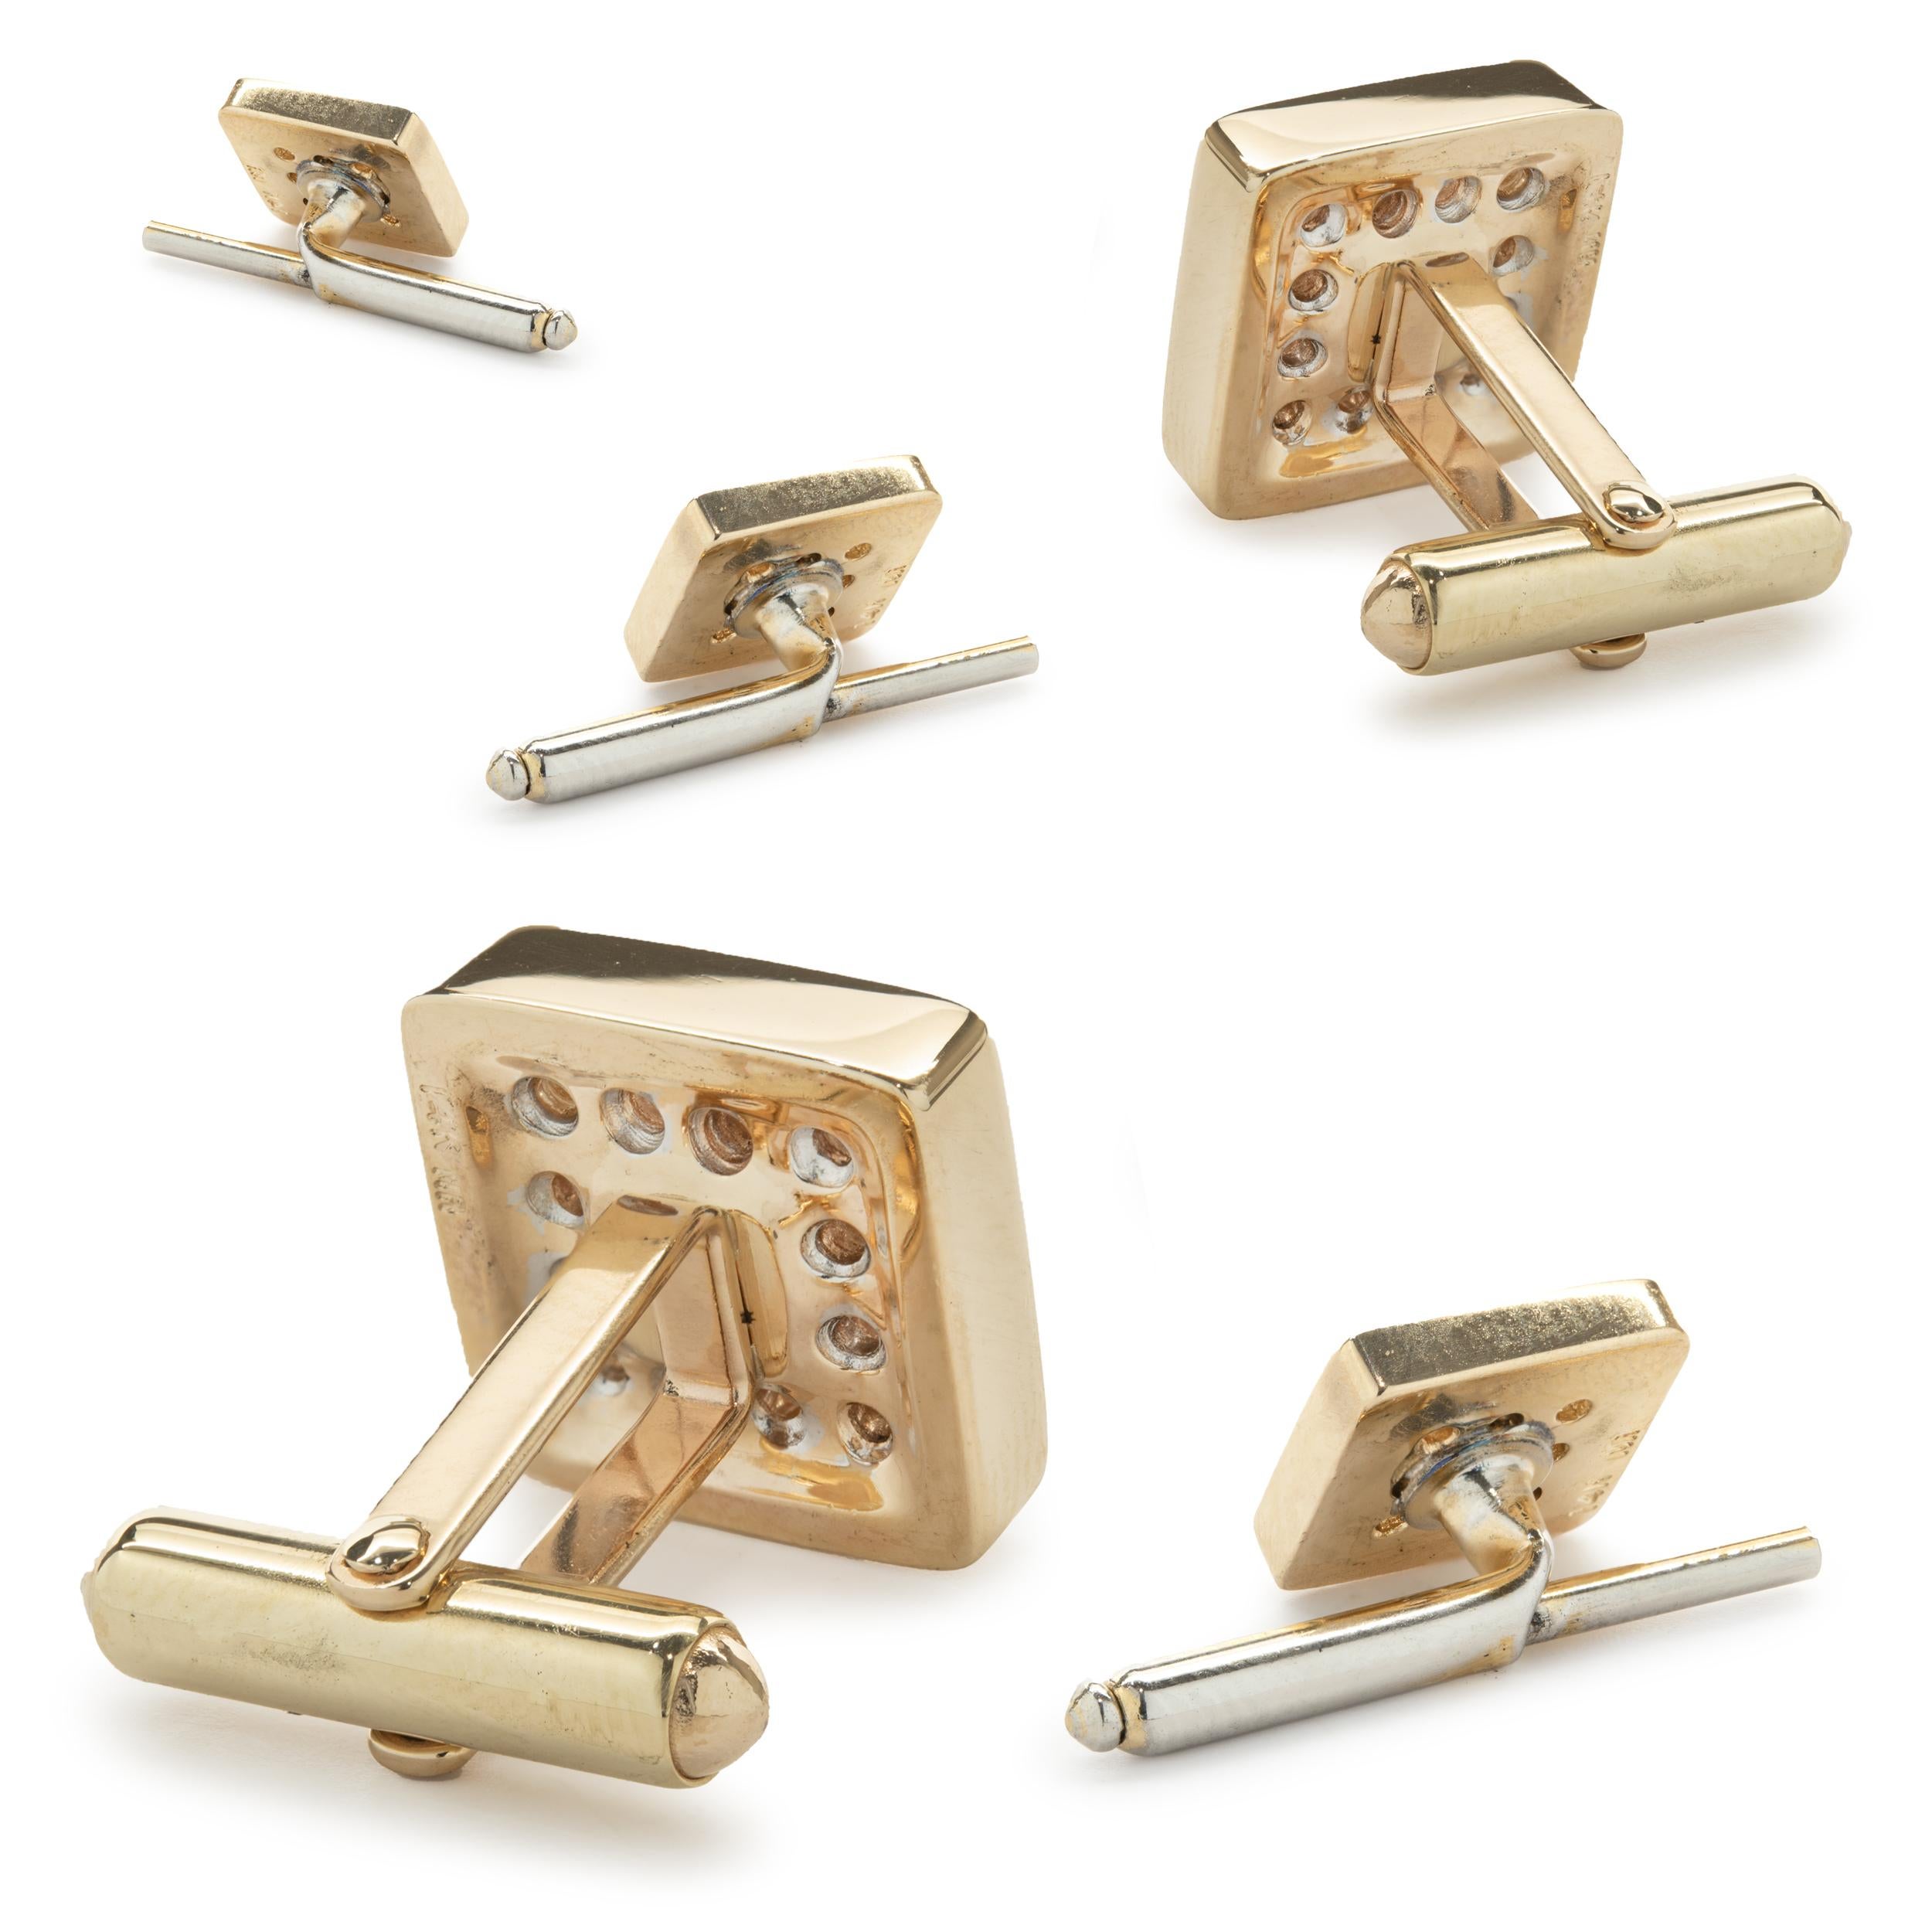 Material: 14K yellow gold
Diamond: 59 round brilliant cut = 1.37cttw
Color: H 
Clarity: SI1
Dimensions: cufflinks measure 14.5 x 14.50mm, shirt studs measure 10.25 x 10.25mm 
Weight: 26.40 grams